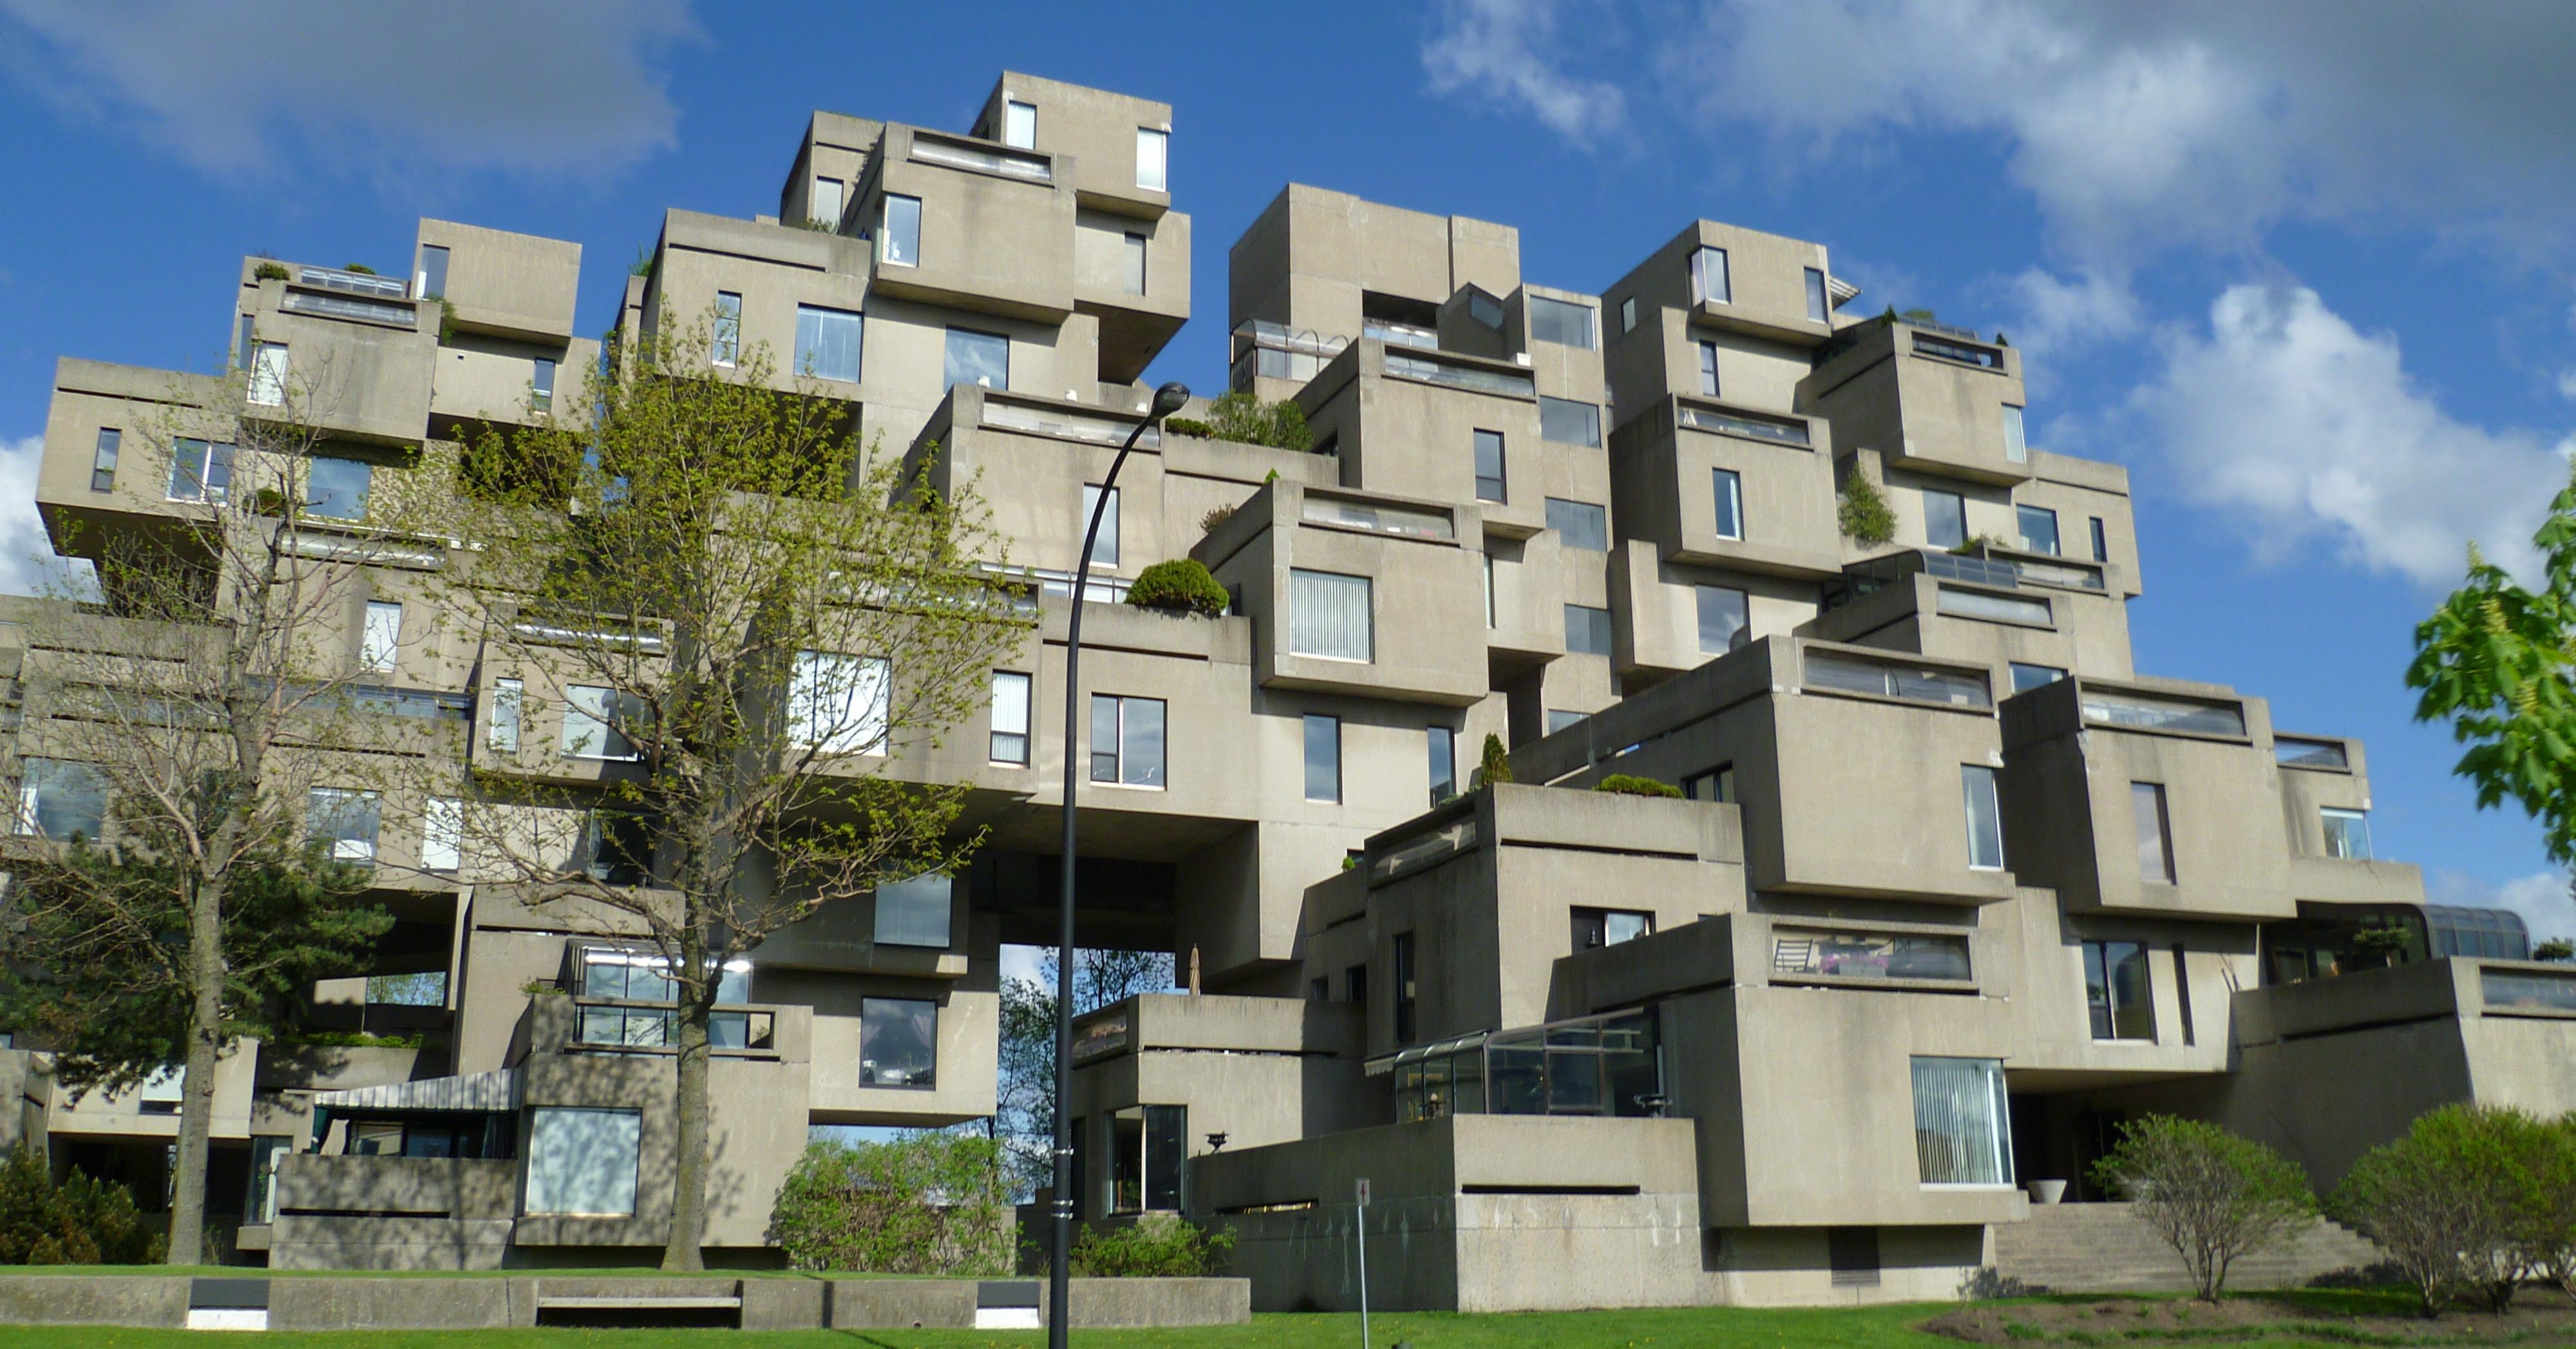 10 Icons of Brutalist Architecture - Artsy